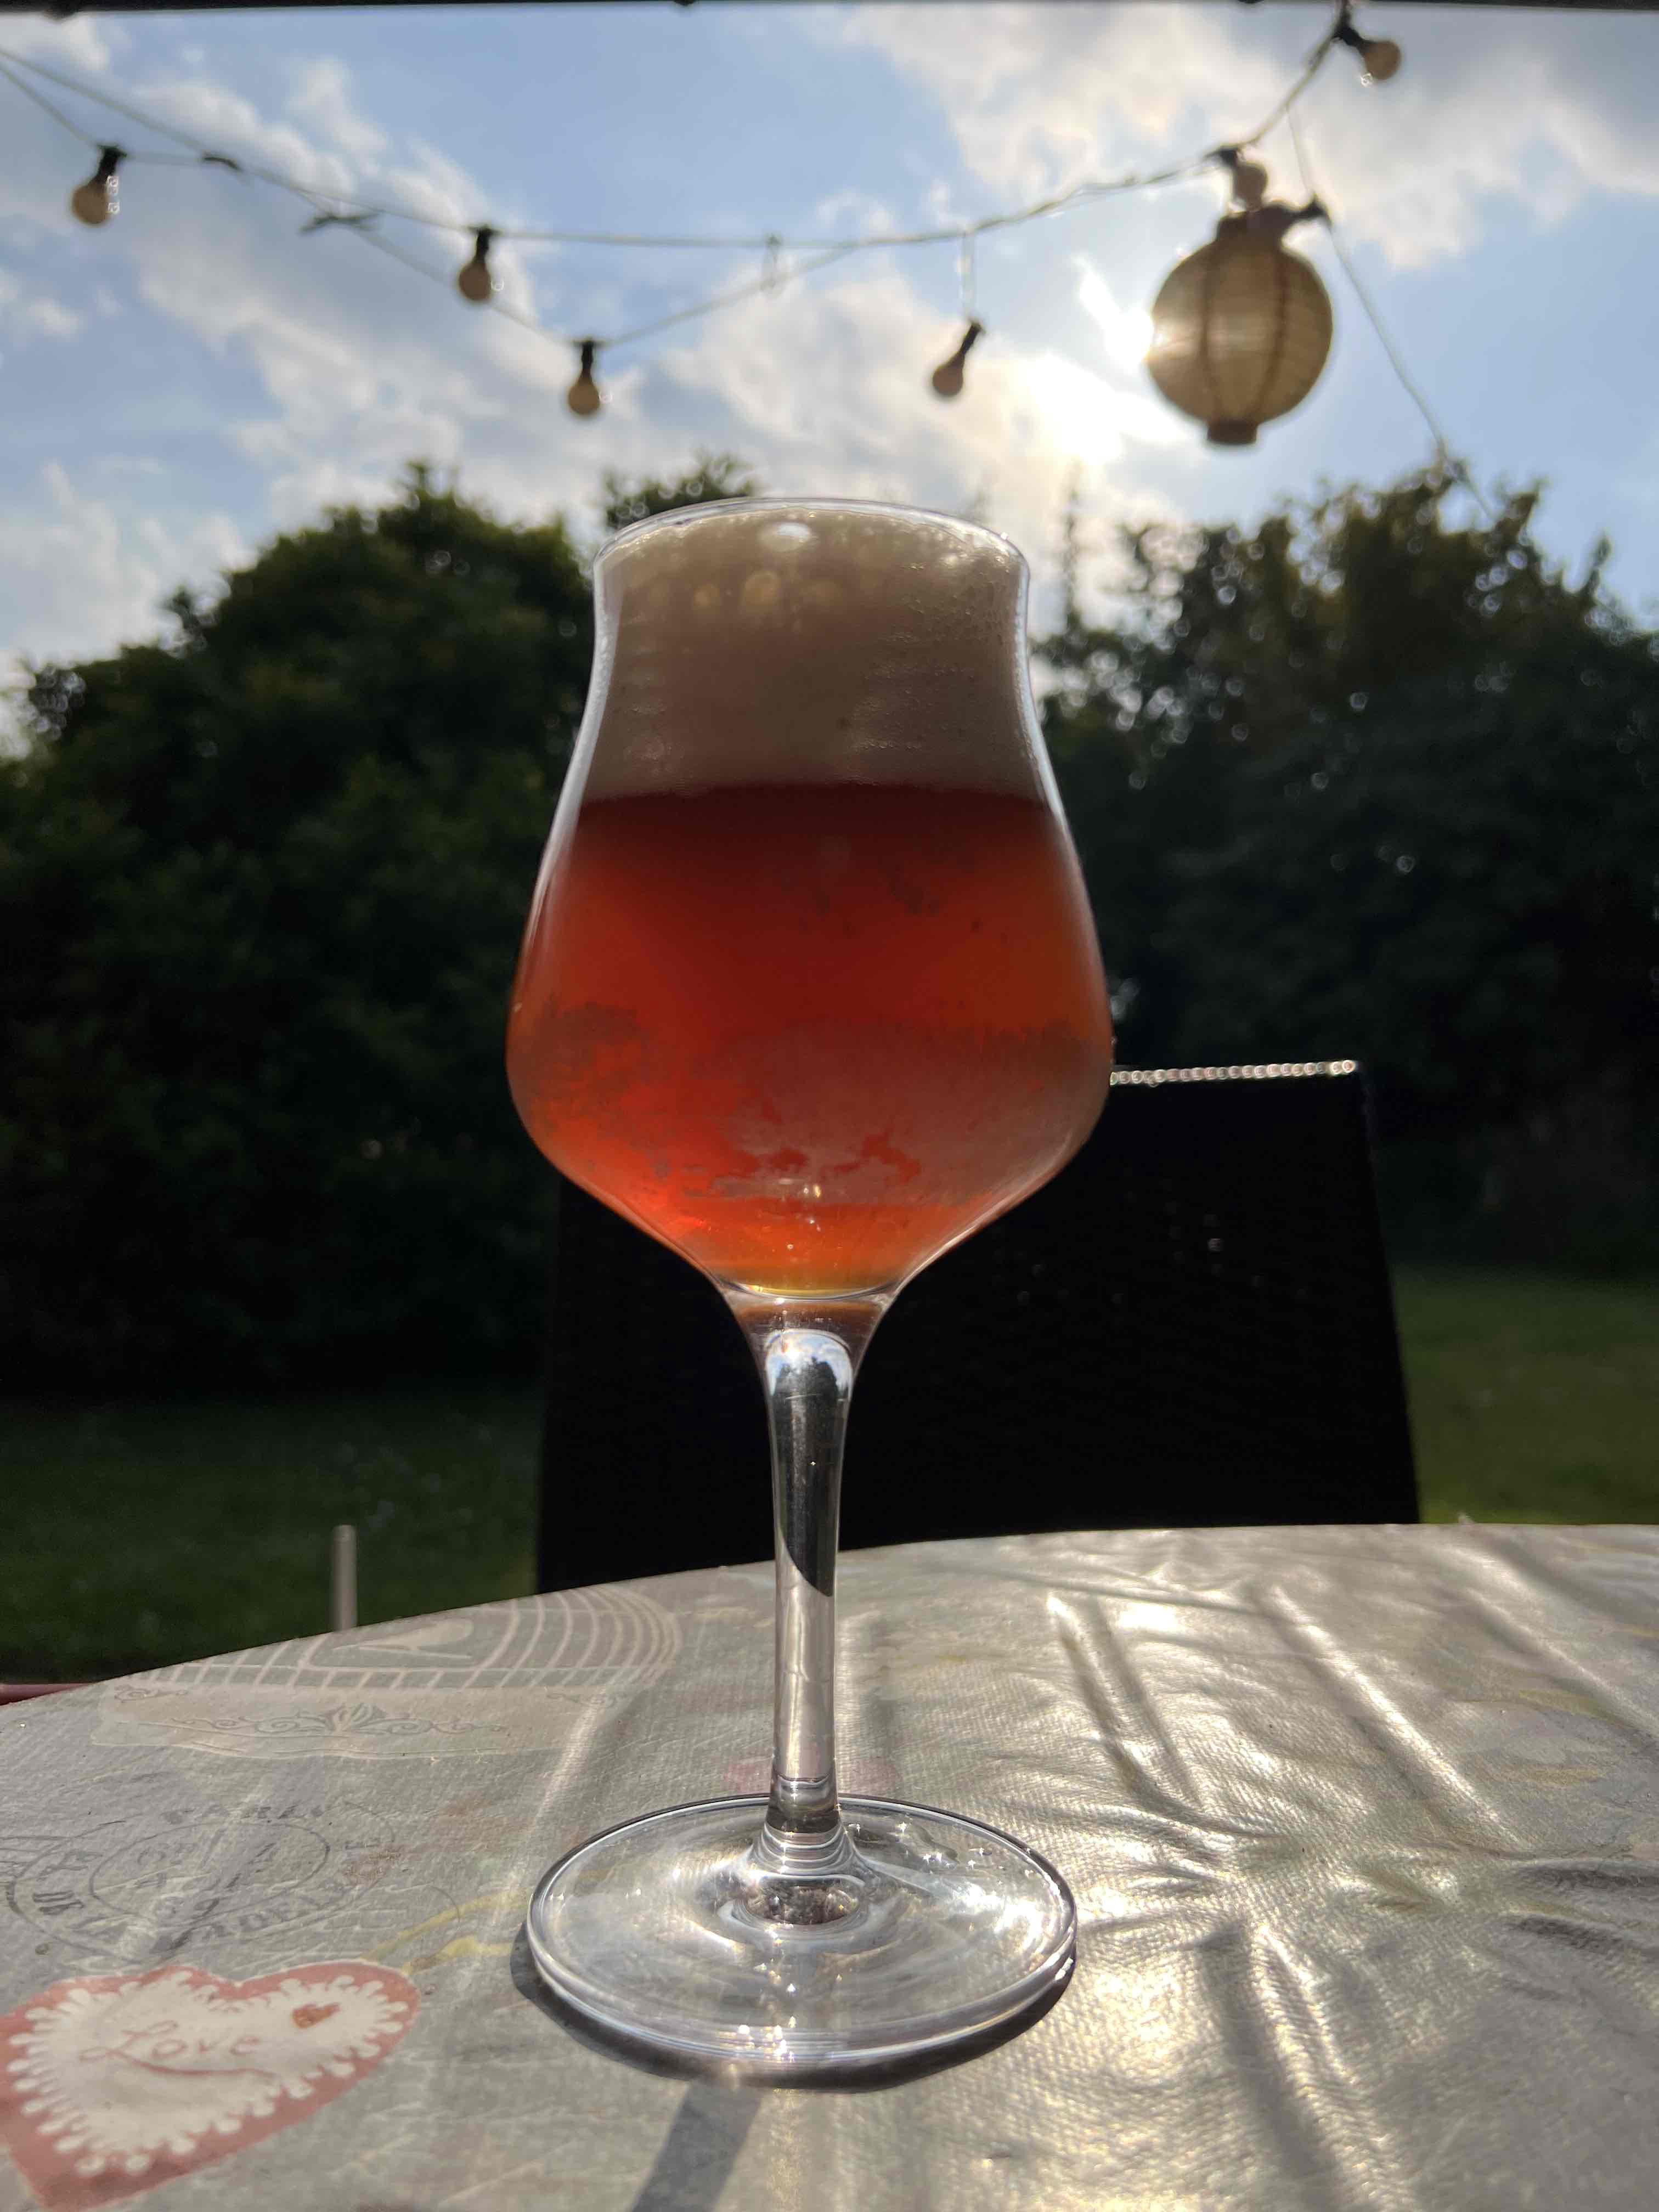 A glass of beer, on a garden table. The color is copperish-brown, a head of fine foam atop.